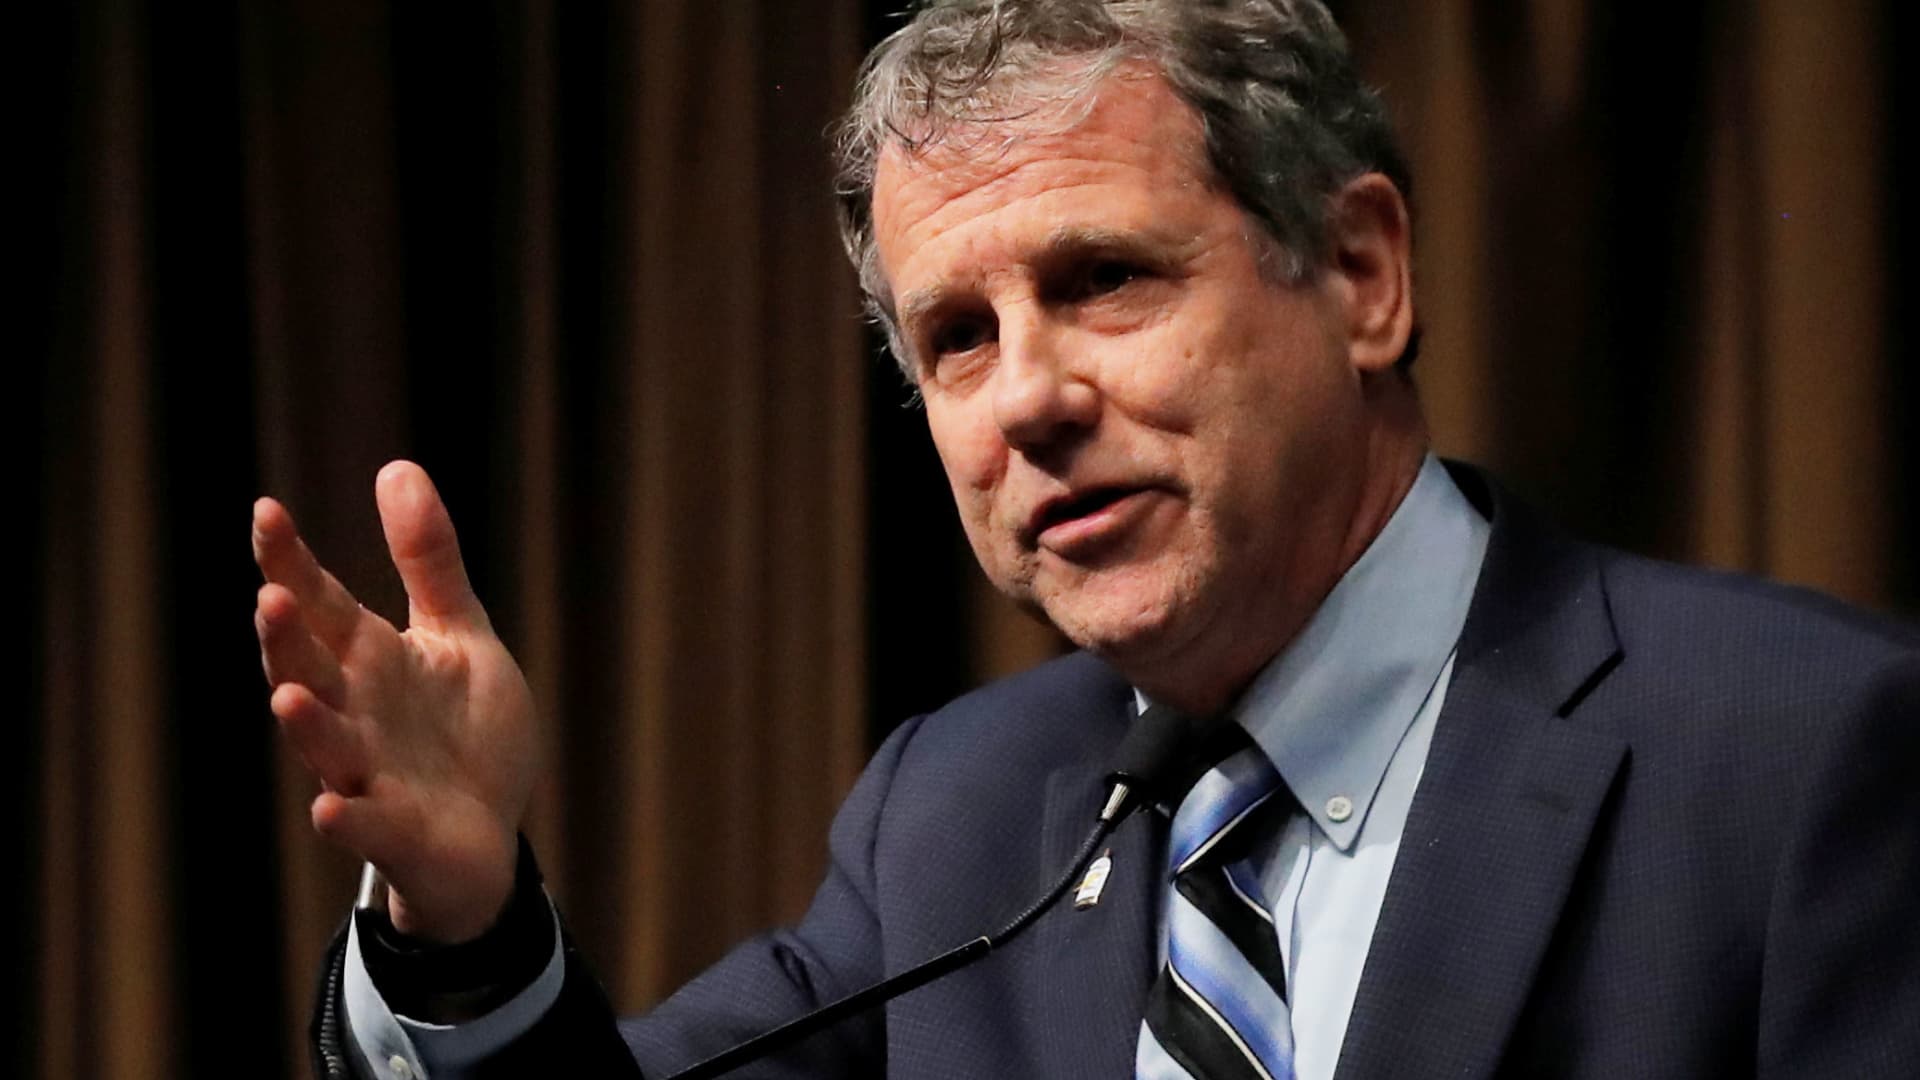 Senator Sherrod Brown (D-OH), speaks at the 2019 National Action Network National Convention in New York, April 5, 2019.